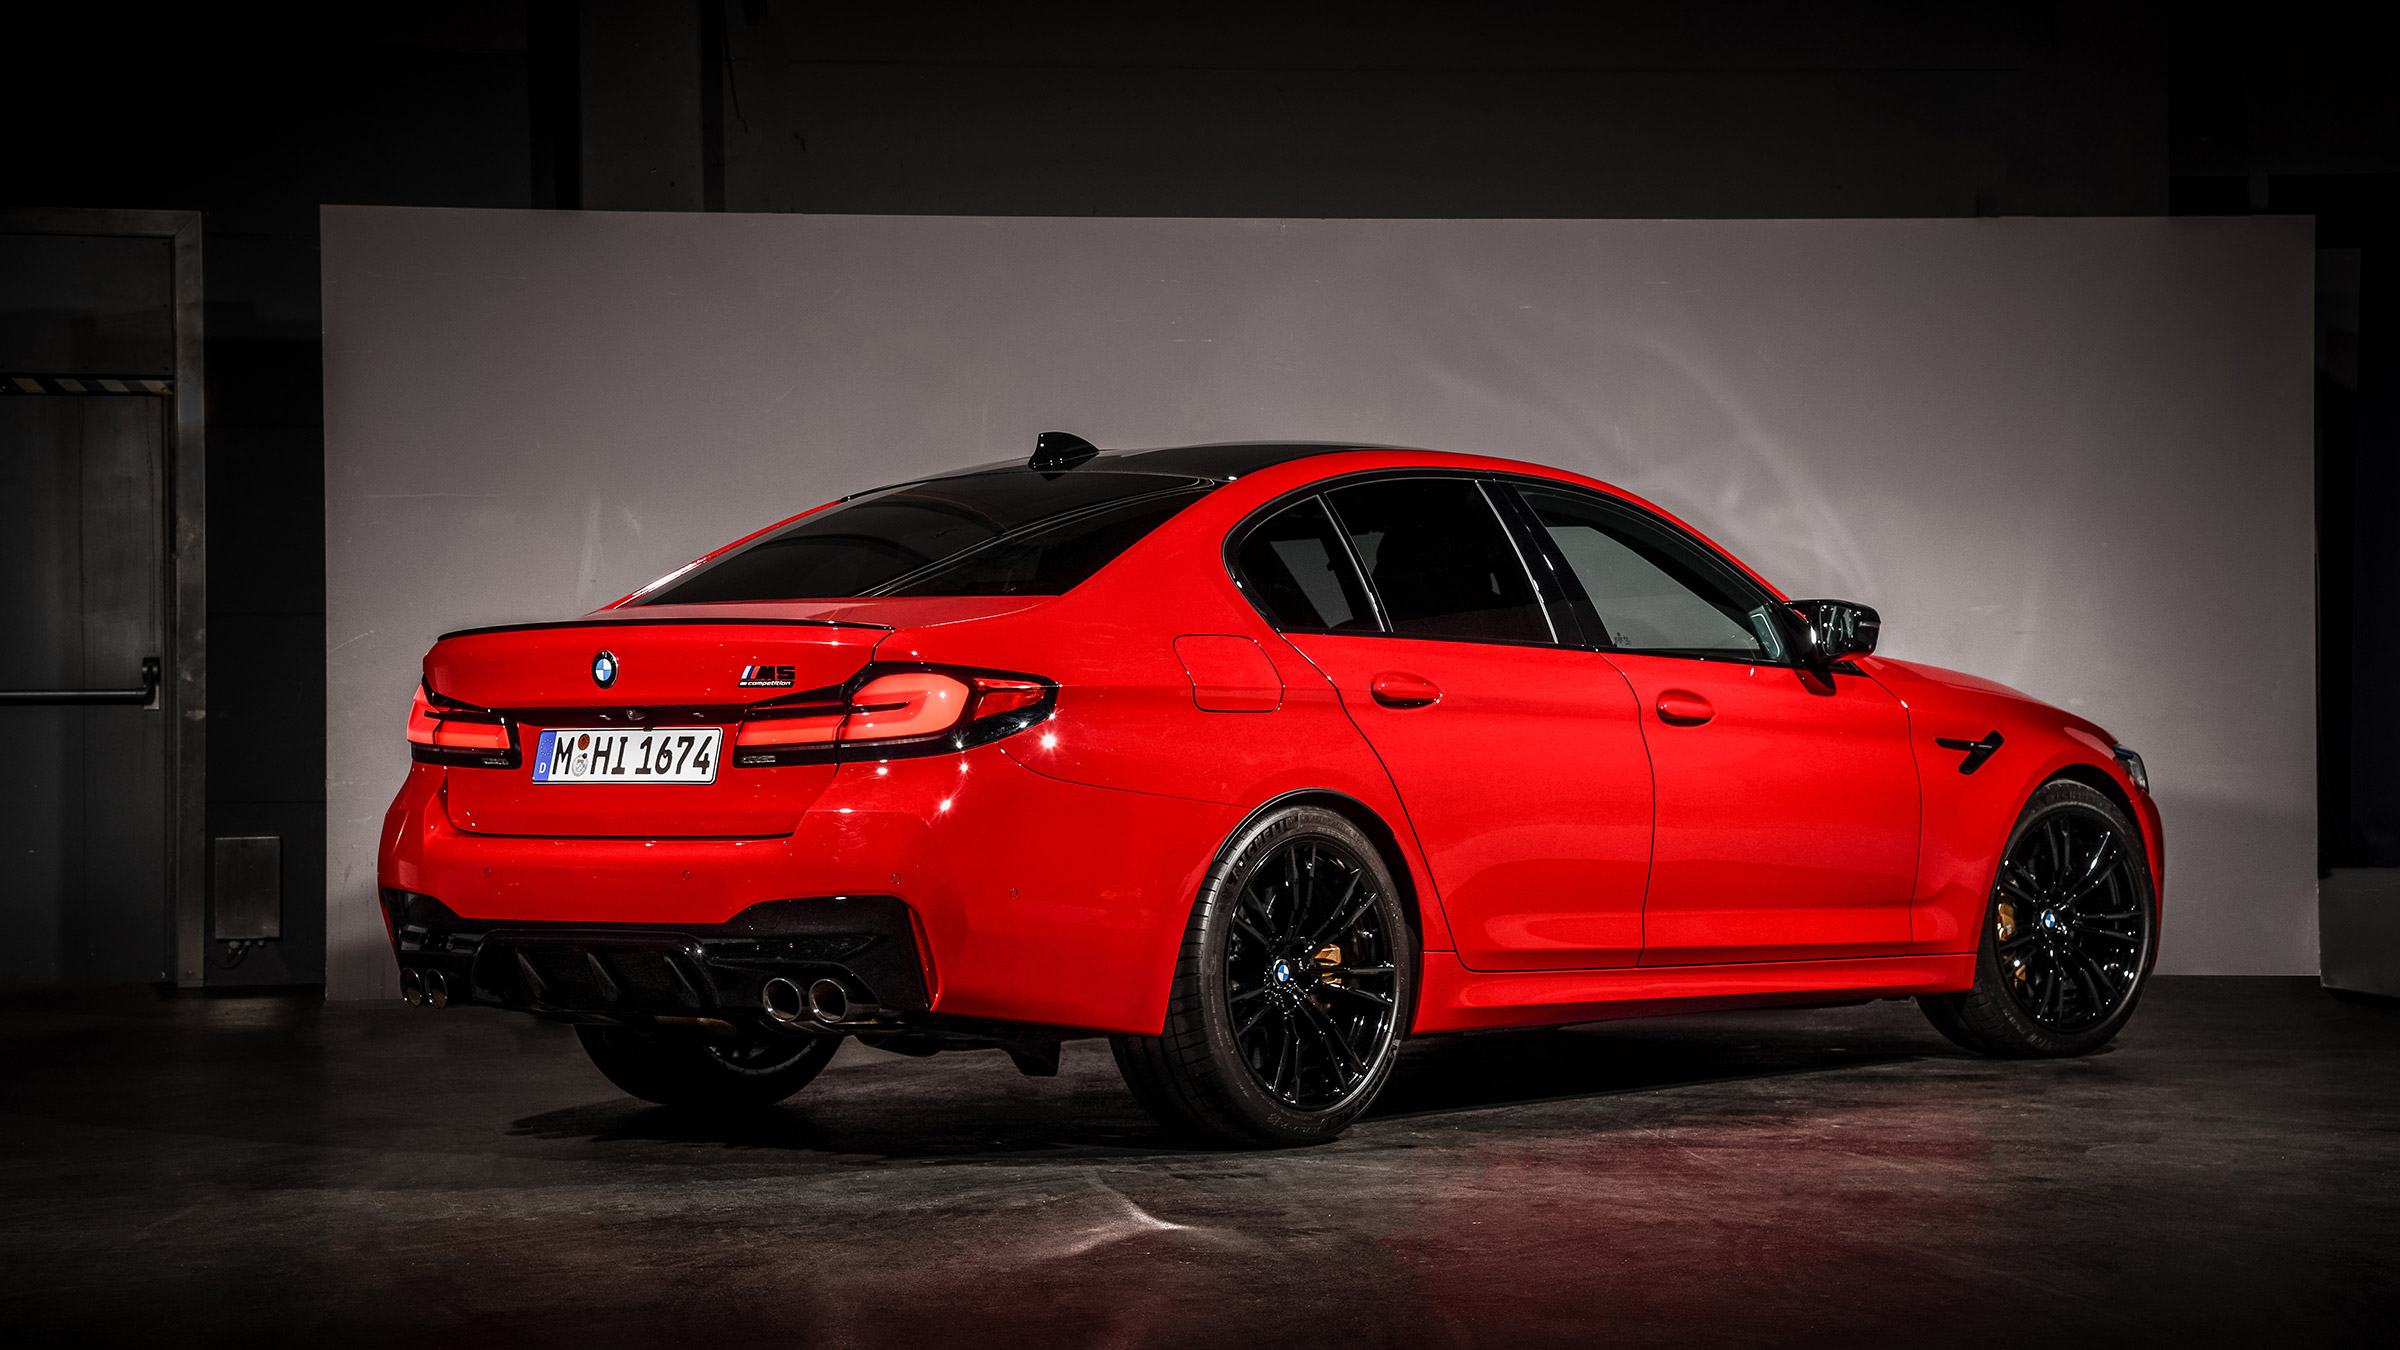 The 2020 BMW M5 Edition 35 Years